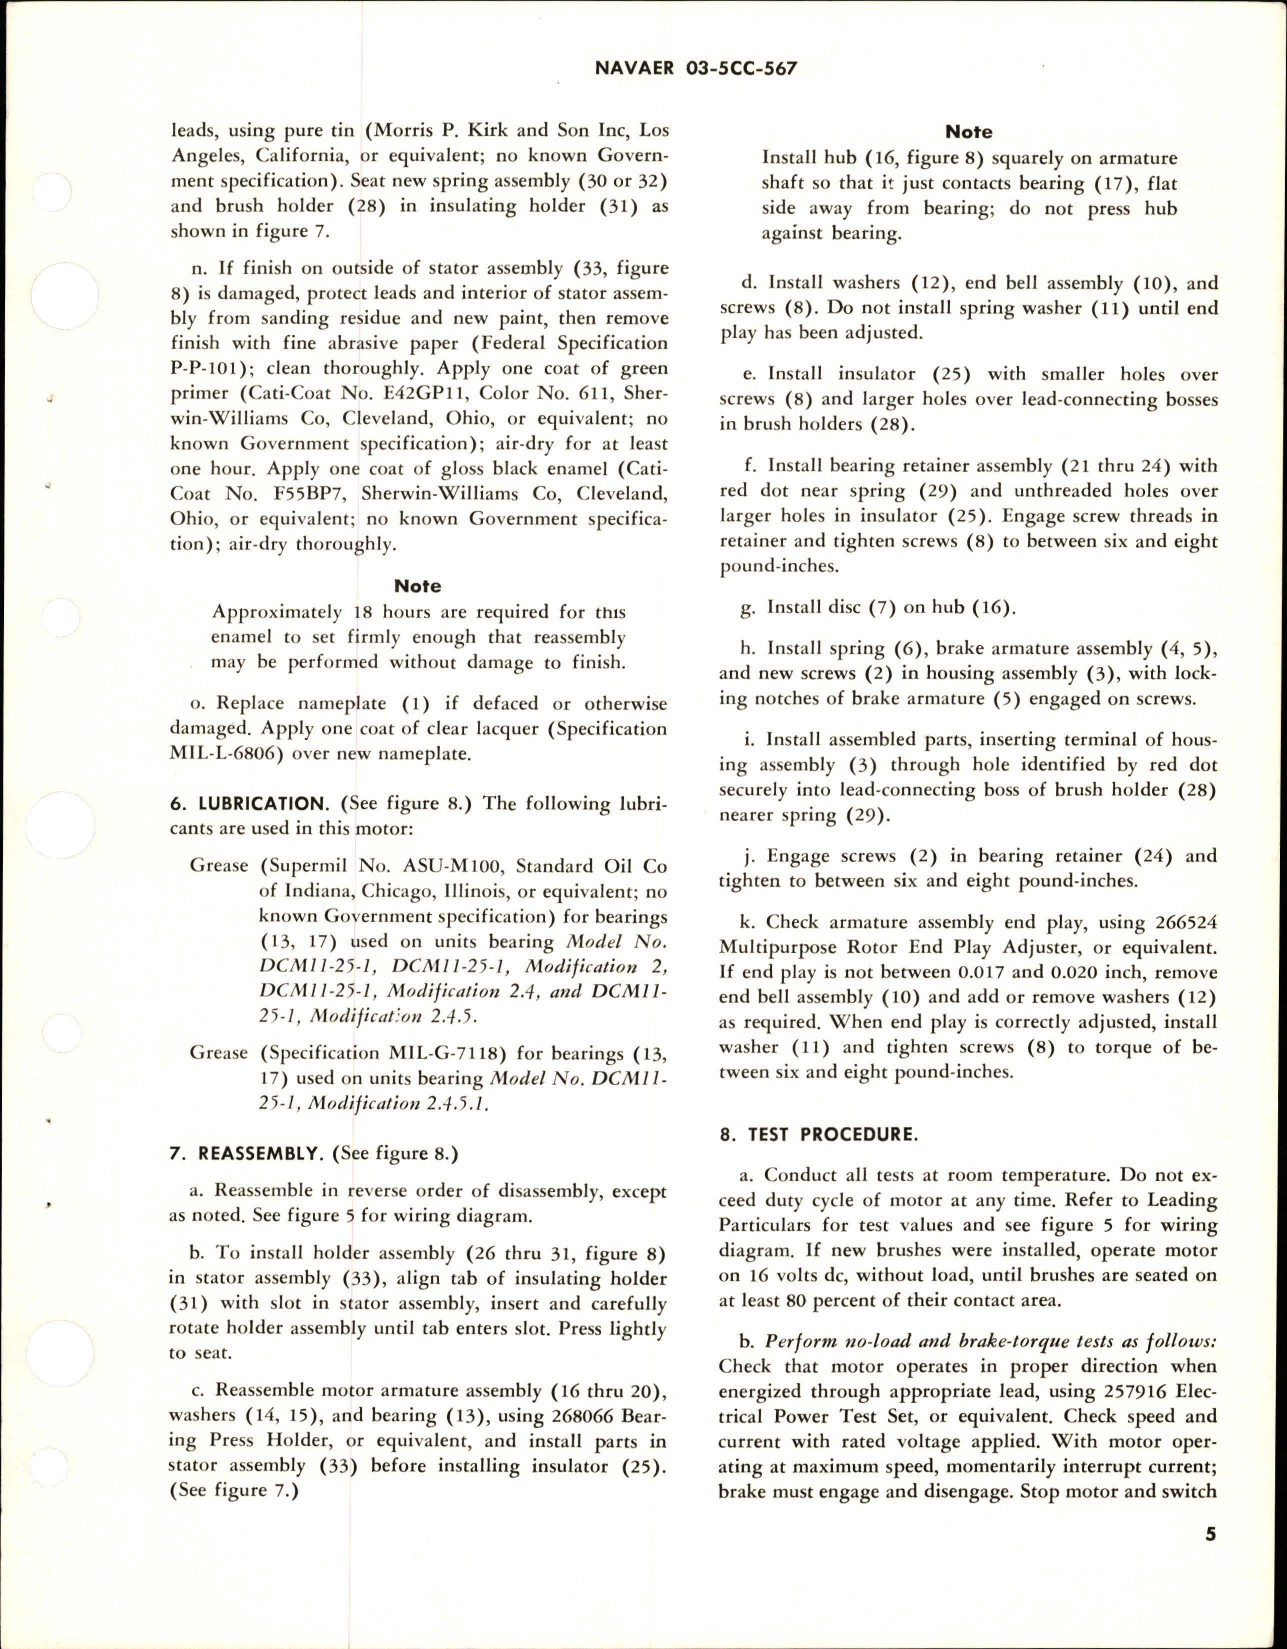 Sample page 5 from AirCorps Library document: Overhaul Instructions with Parts Breakdown for Direct Current Motor - Part 36873 - Model DCM11-25-1